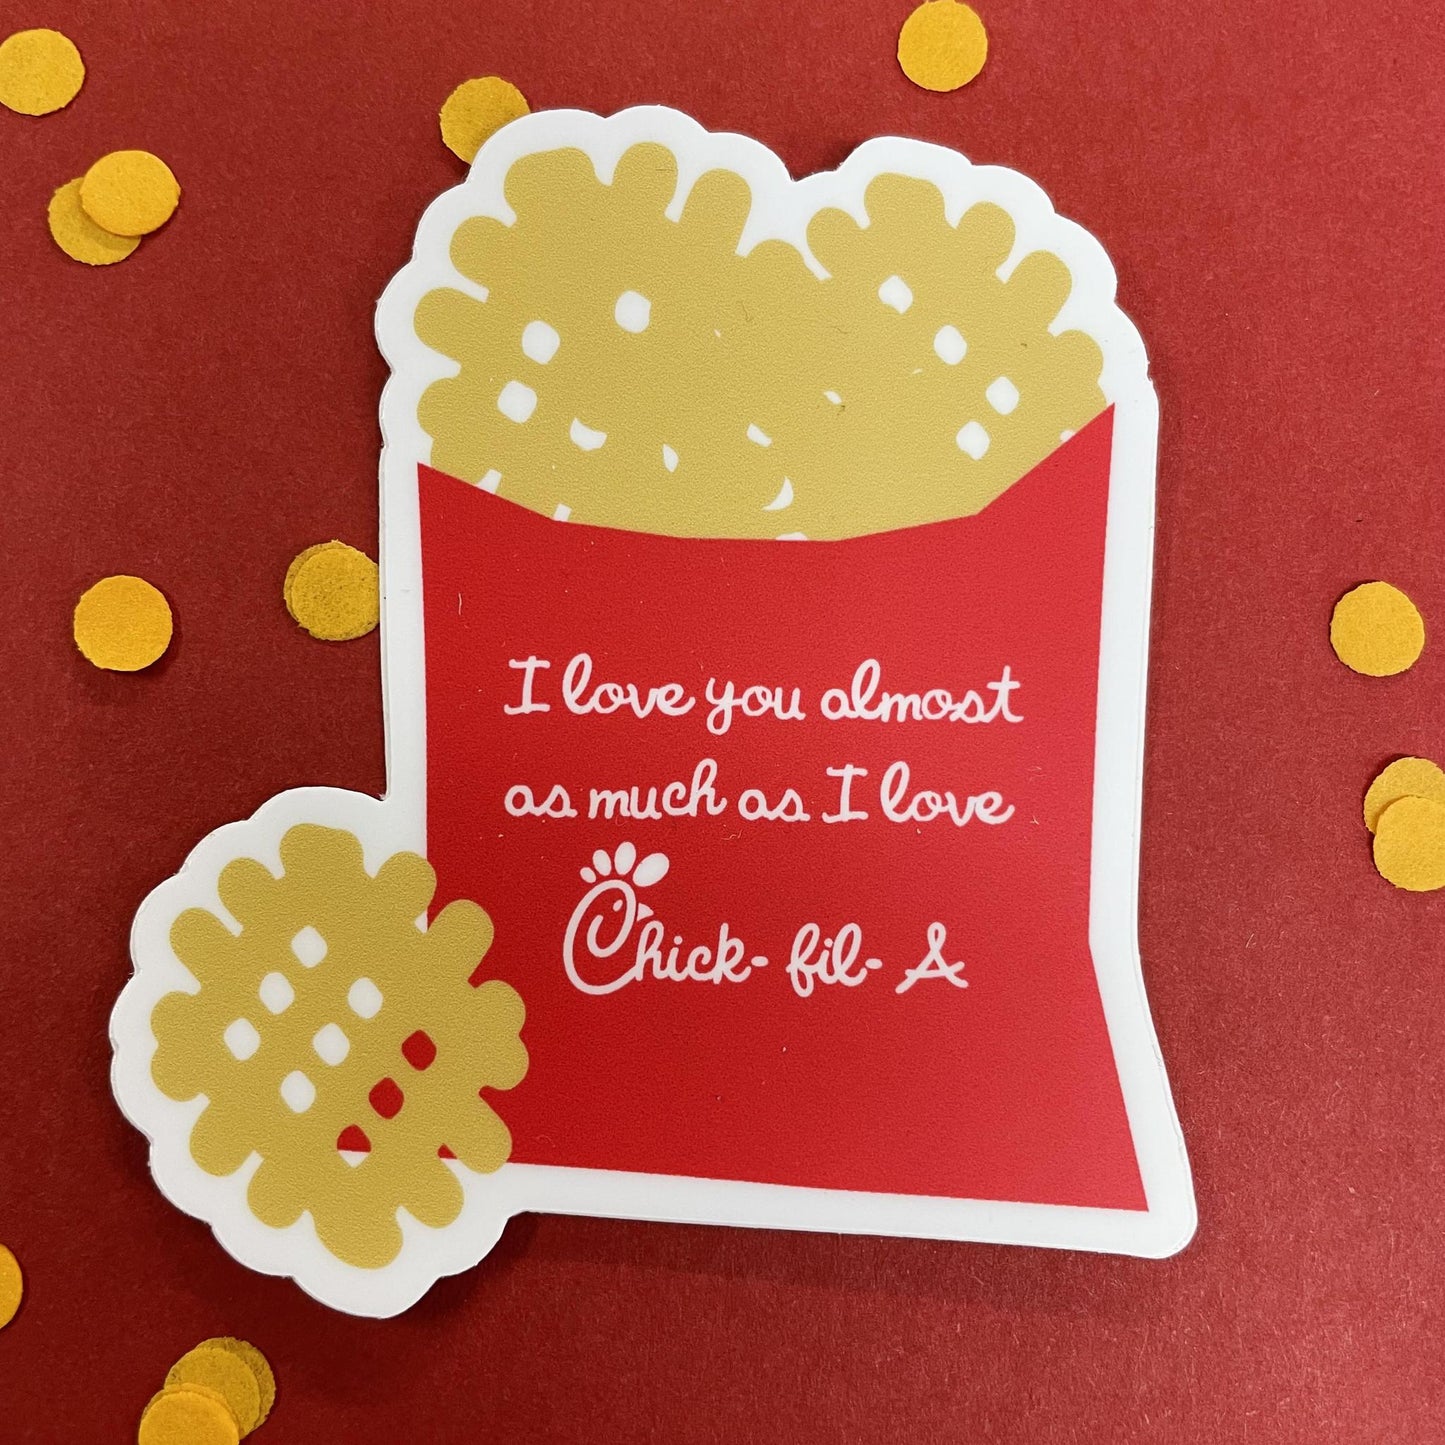 Love for Chick-fil-a Sticker- Inviting Affairs Paperie